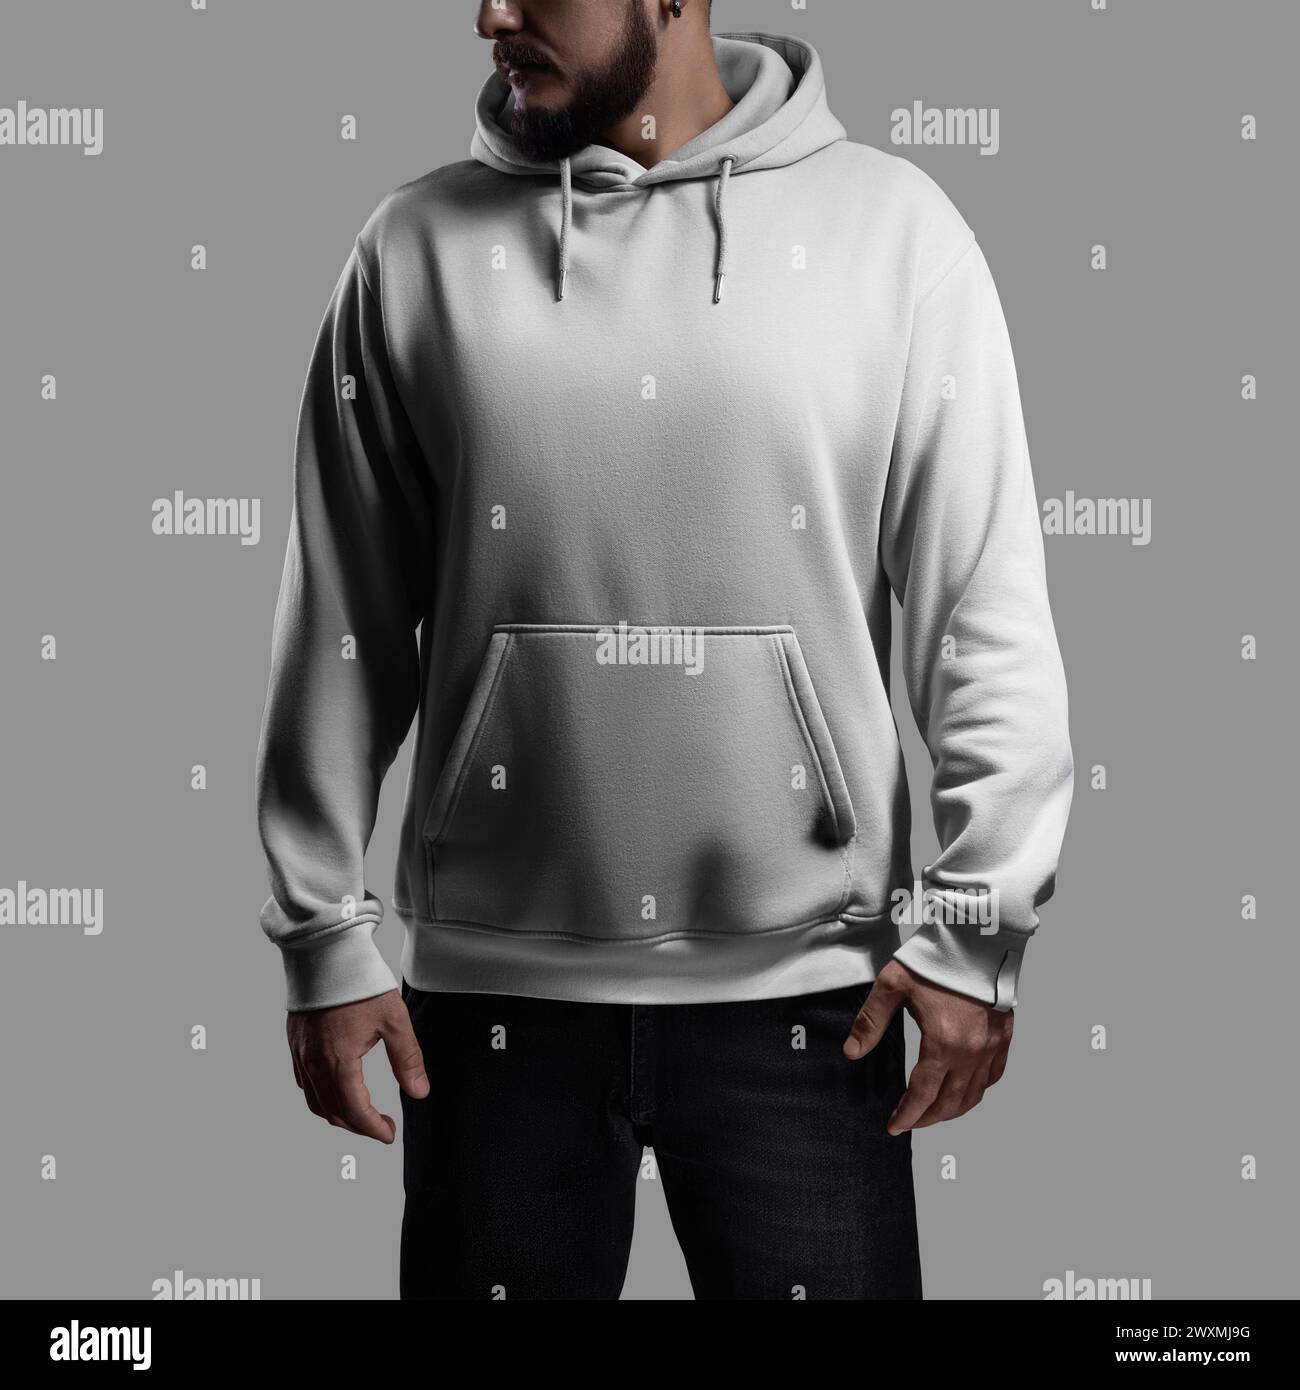 Mockup of a white oversized hoodie on a bearded man with his head turned, front view. Fashionable streetwear template for design. Sweatshirt with hood Stock Photo